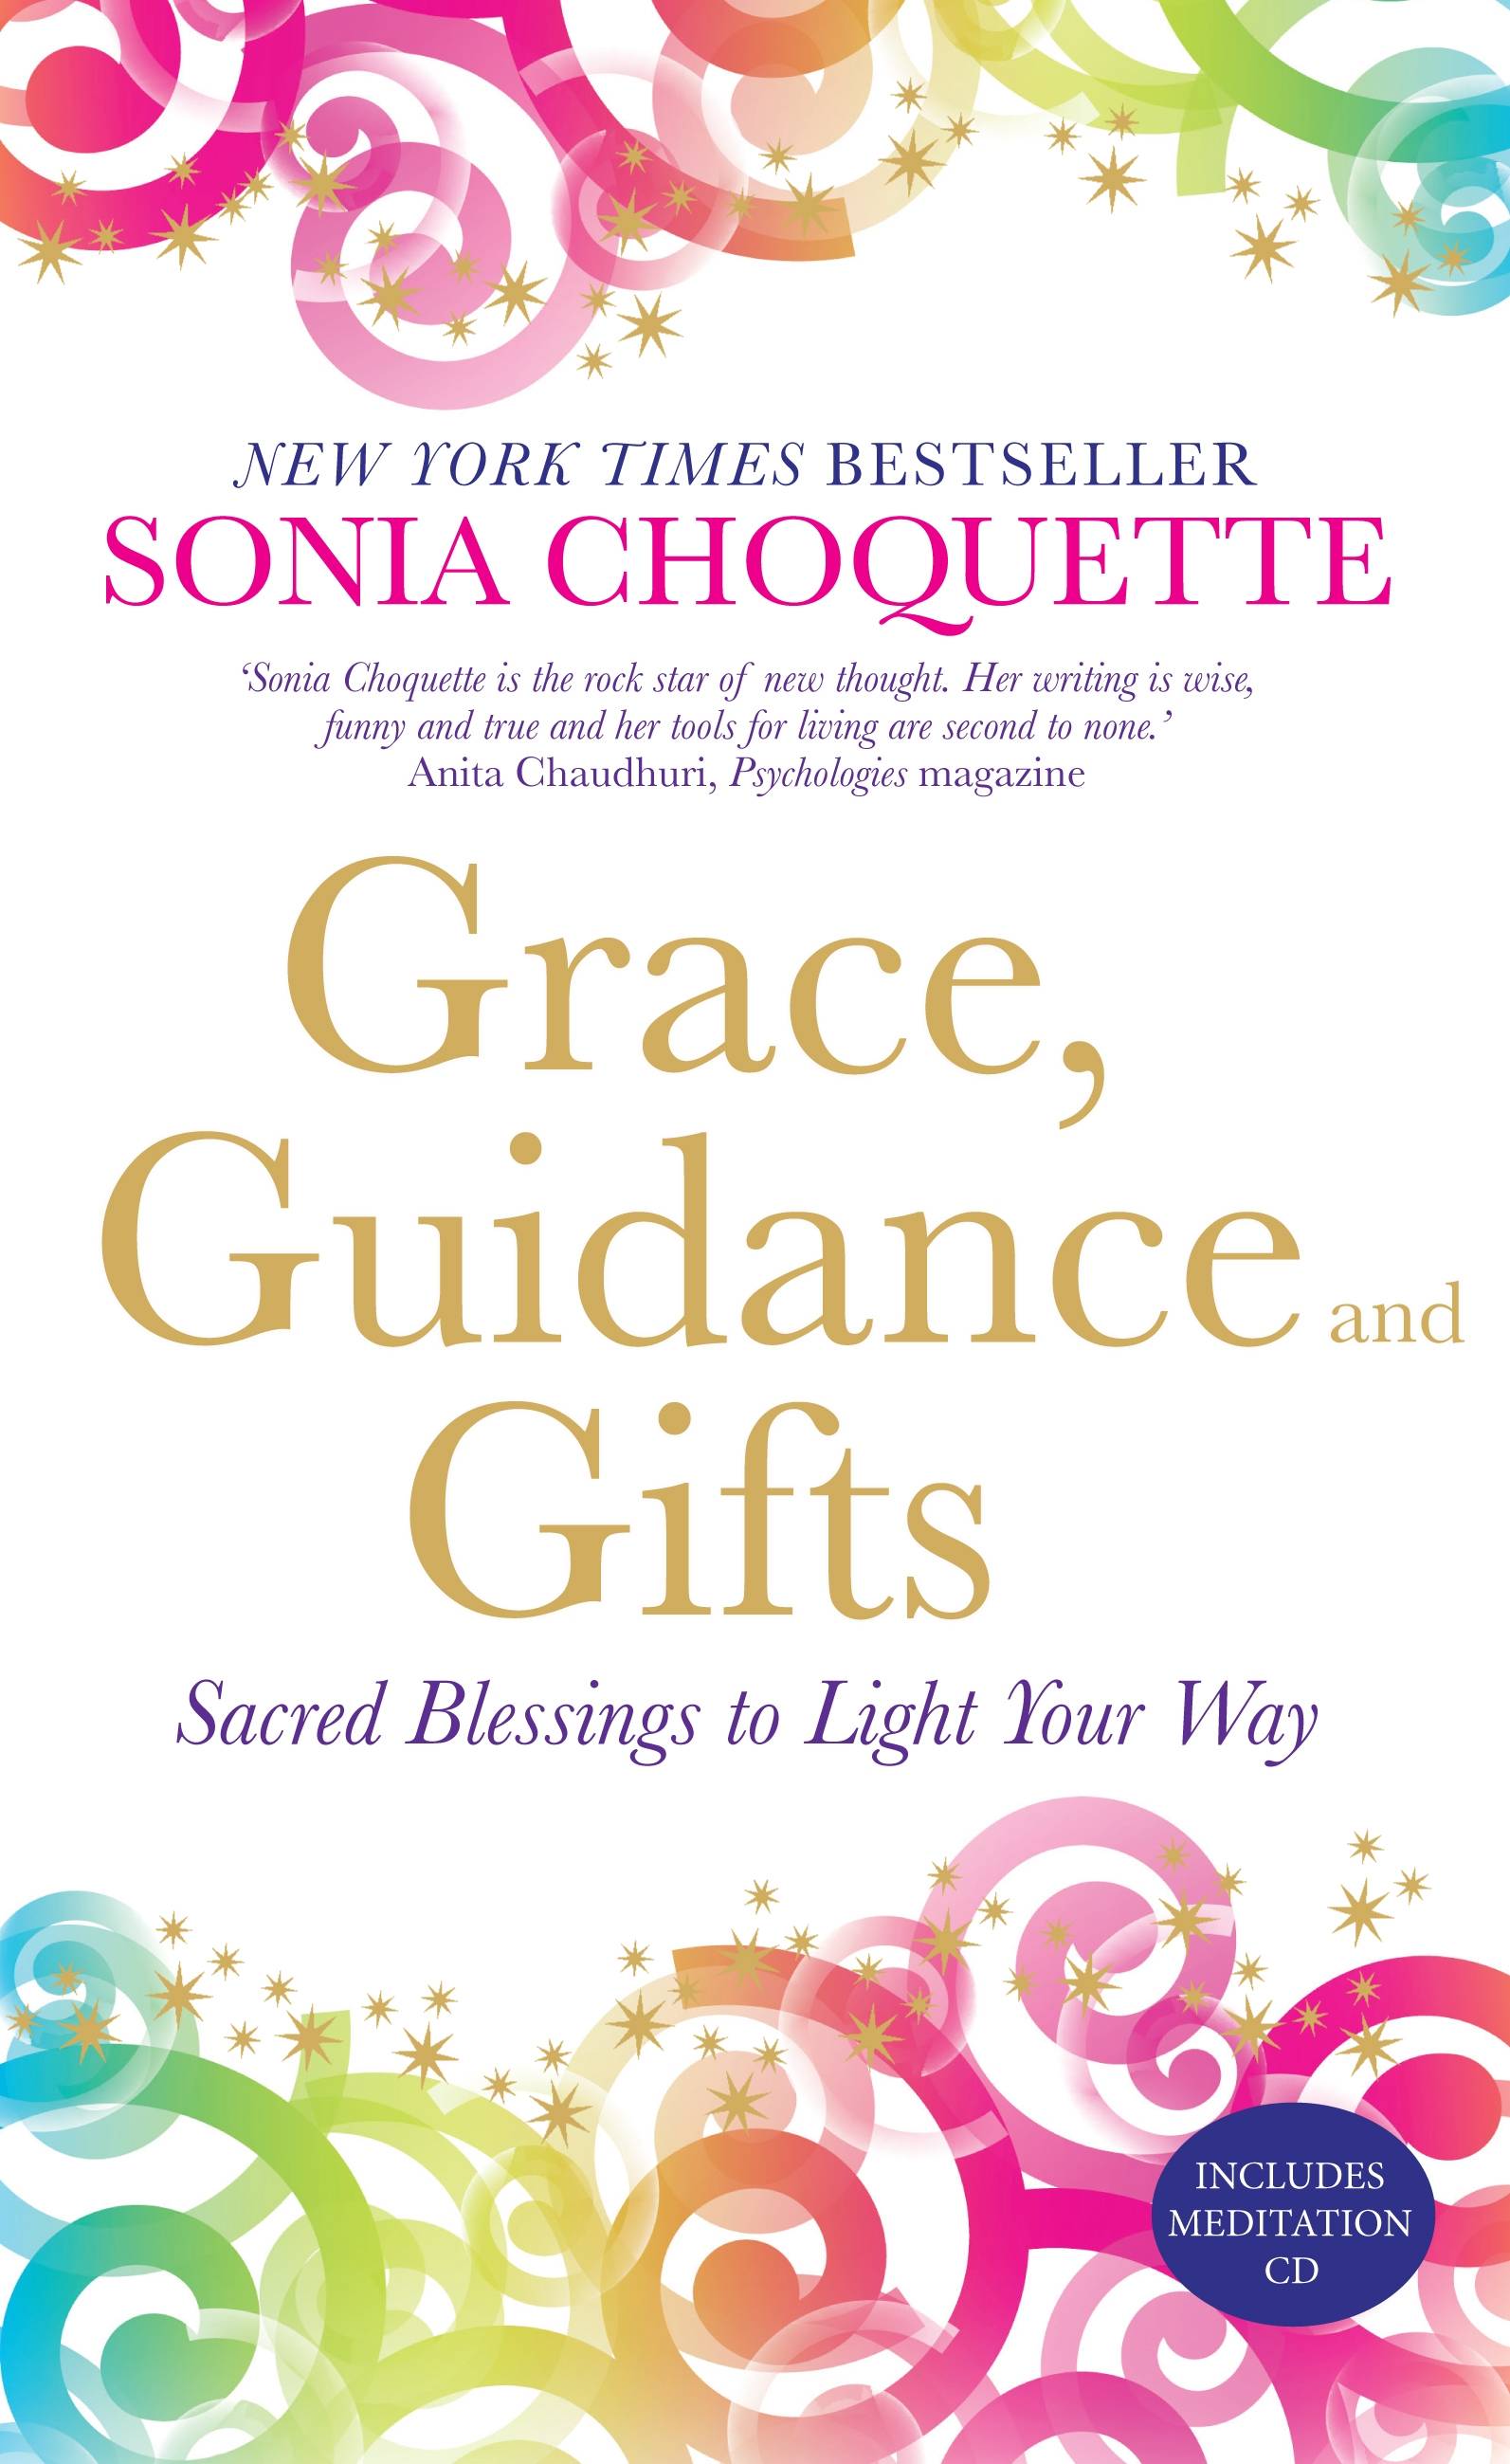 Grace, guidance and gifts - sacred blessings to light your way